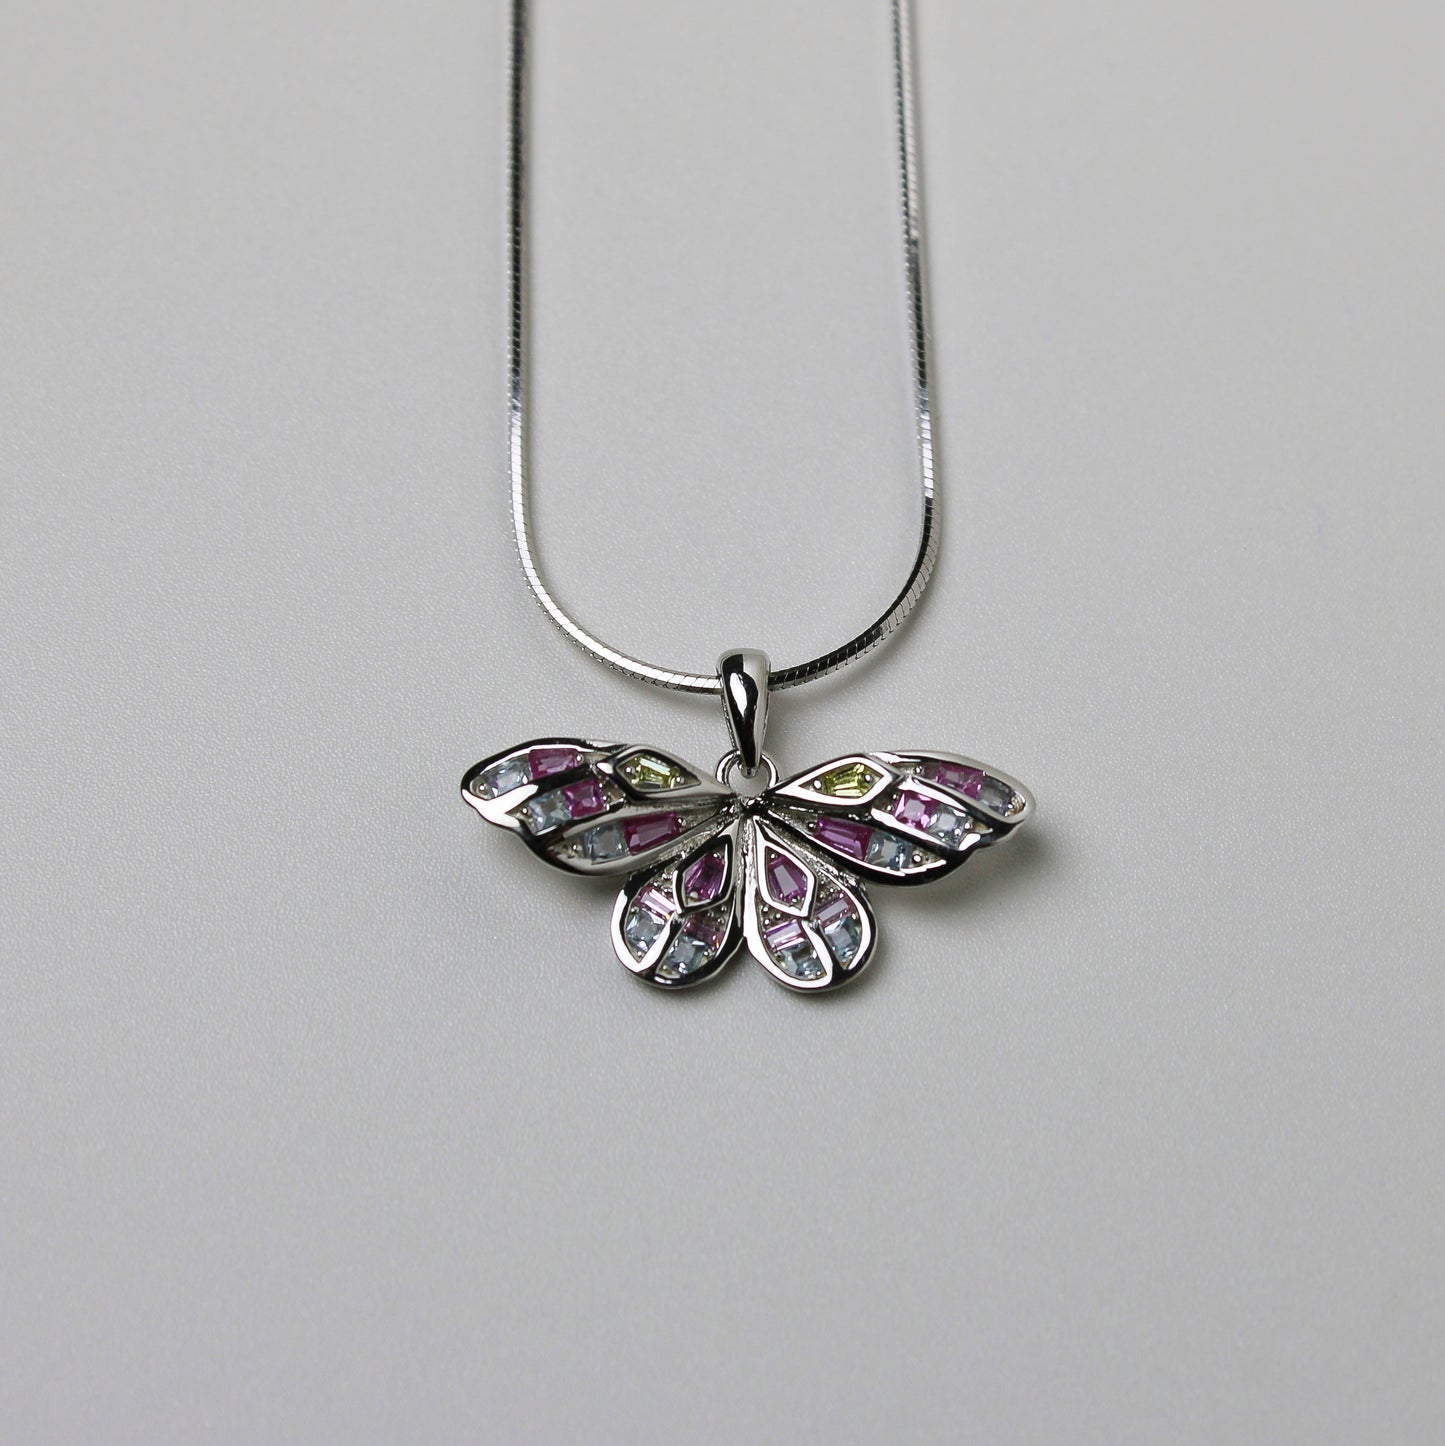 THE BUTTERFLY NECKLACE